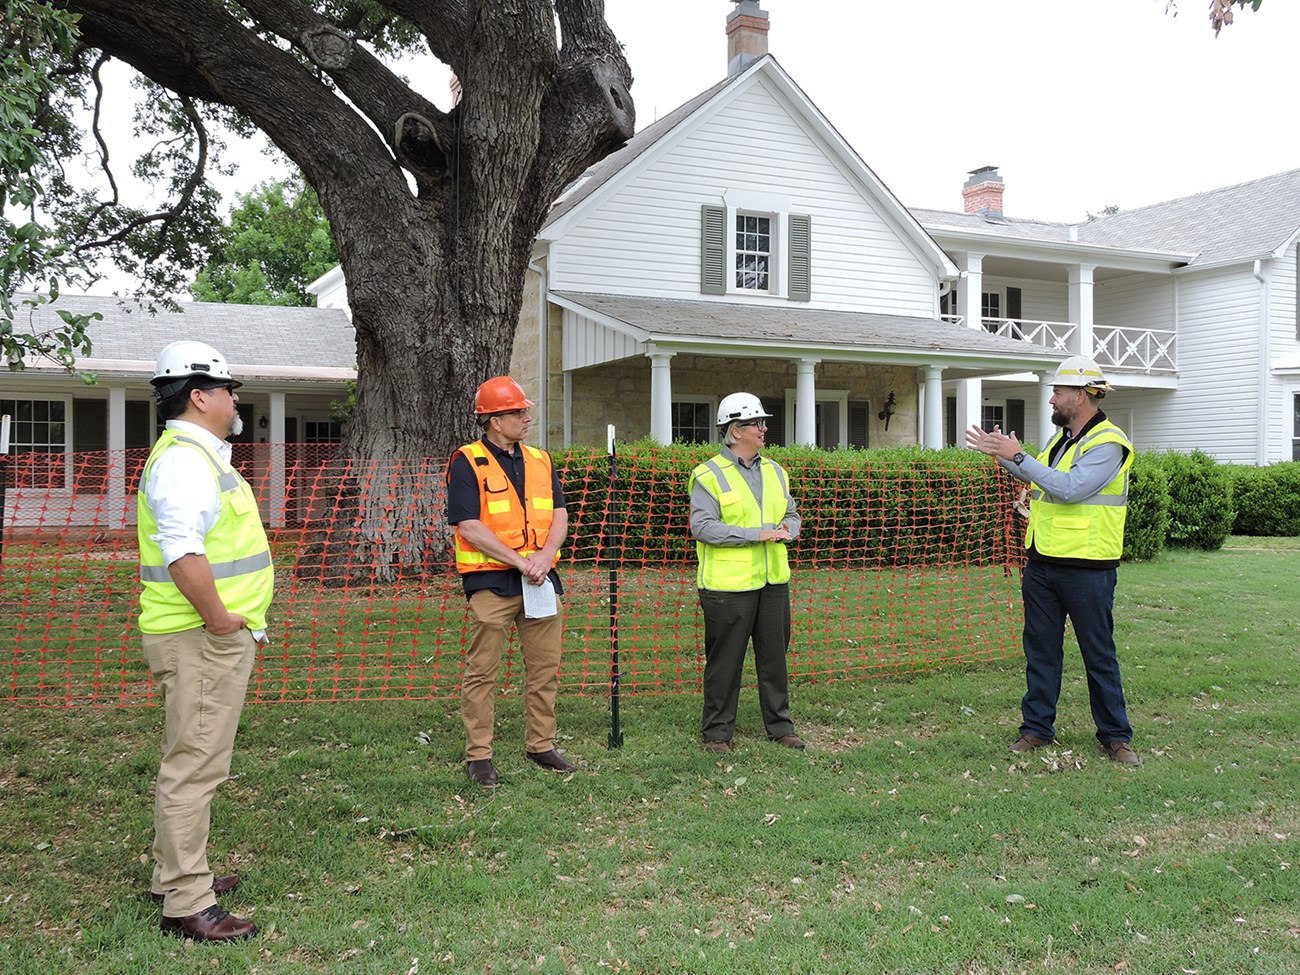 Four people in bright safety vests and hard hats stand in front of a two-story house surrounded by orange fencing.